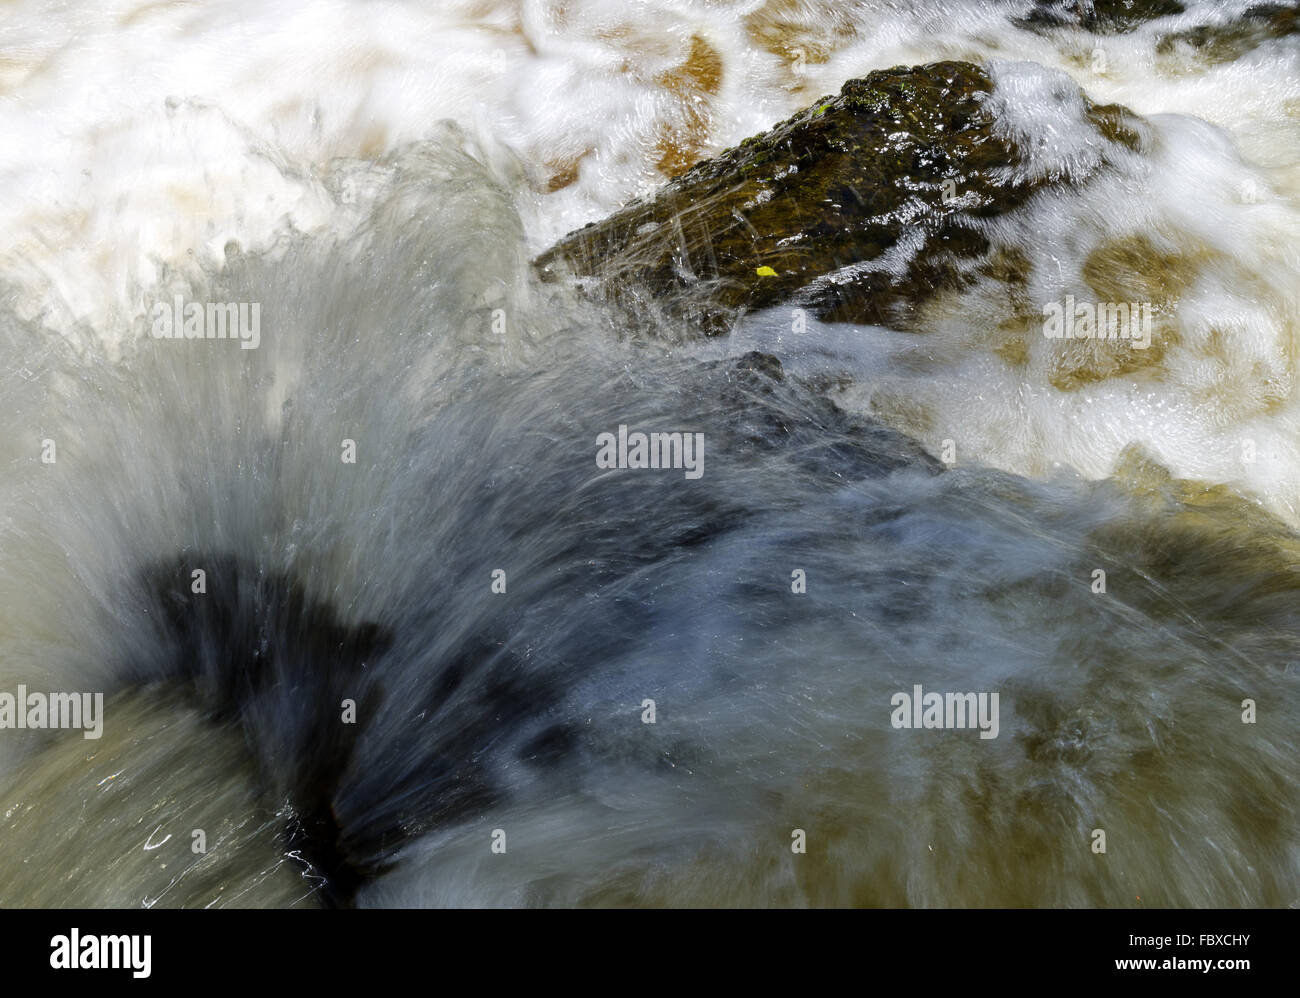 gush of water and rock Stock Photo